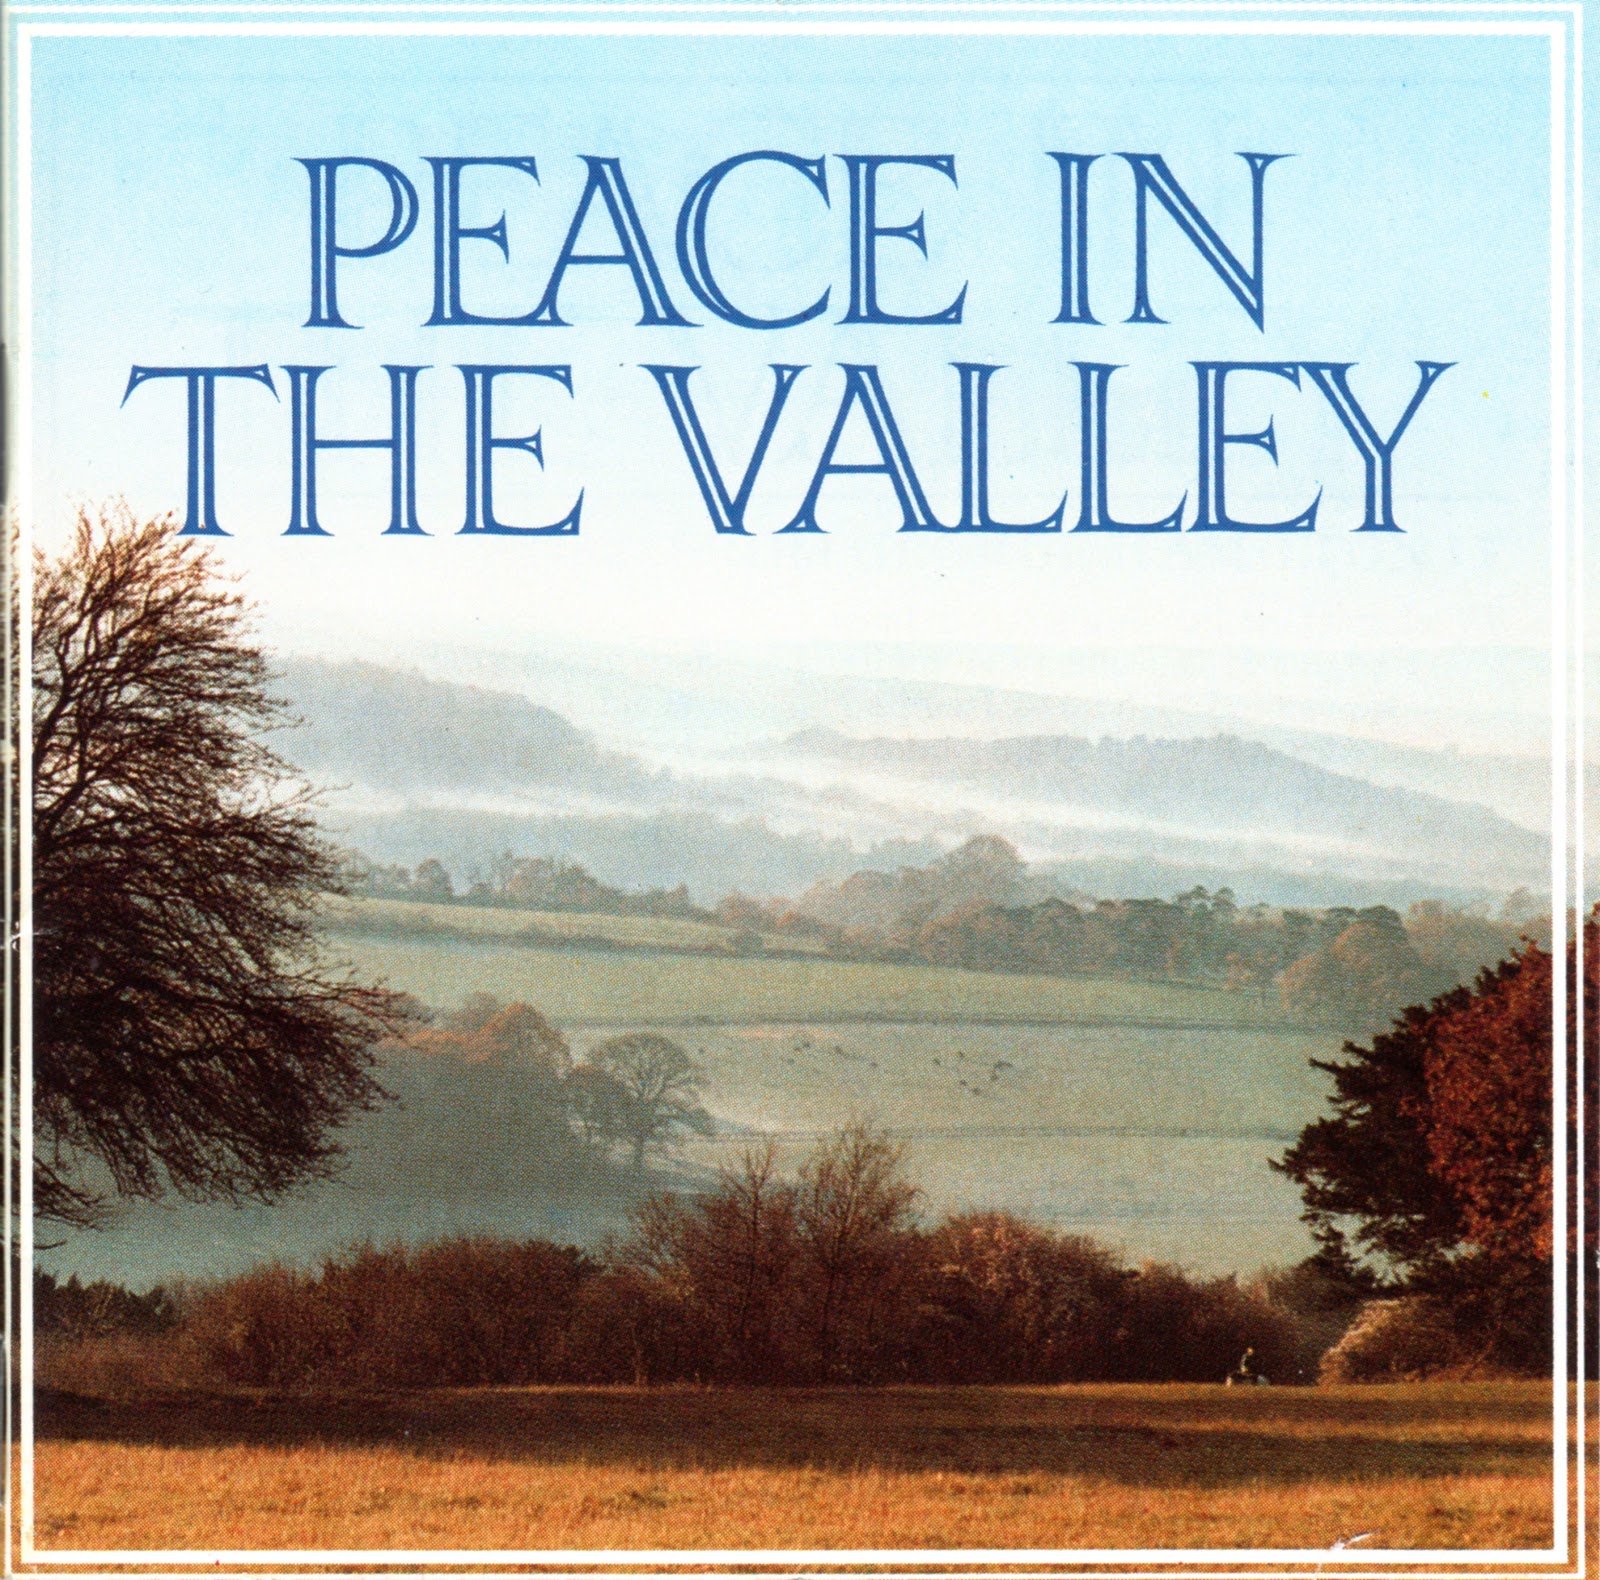 Peace in the valley tennessee ernie ford mp3 #7